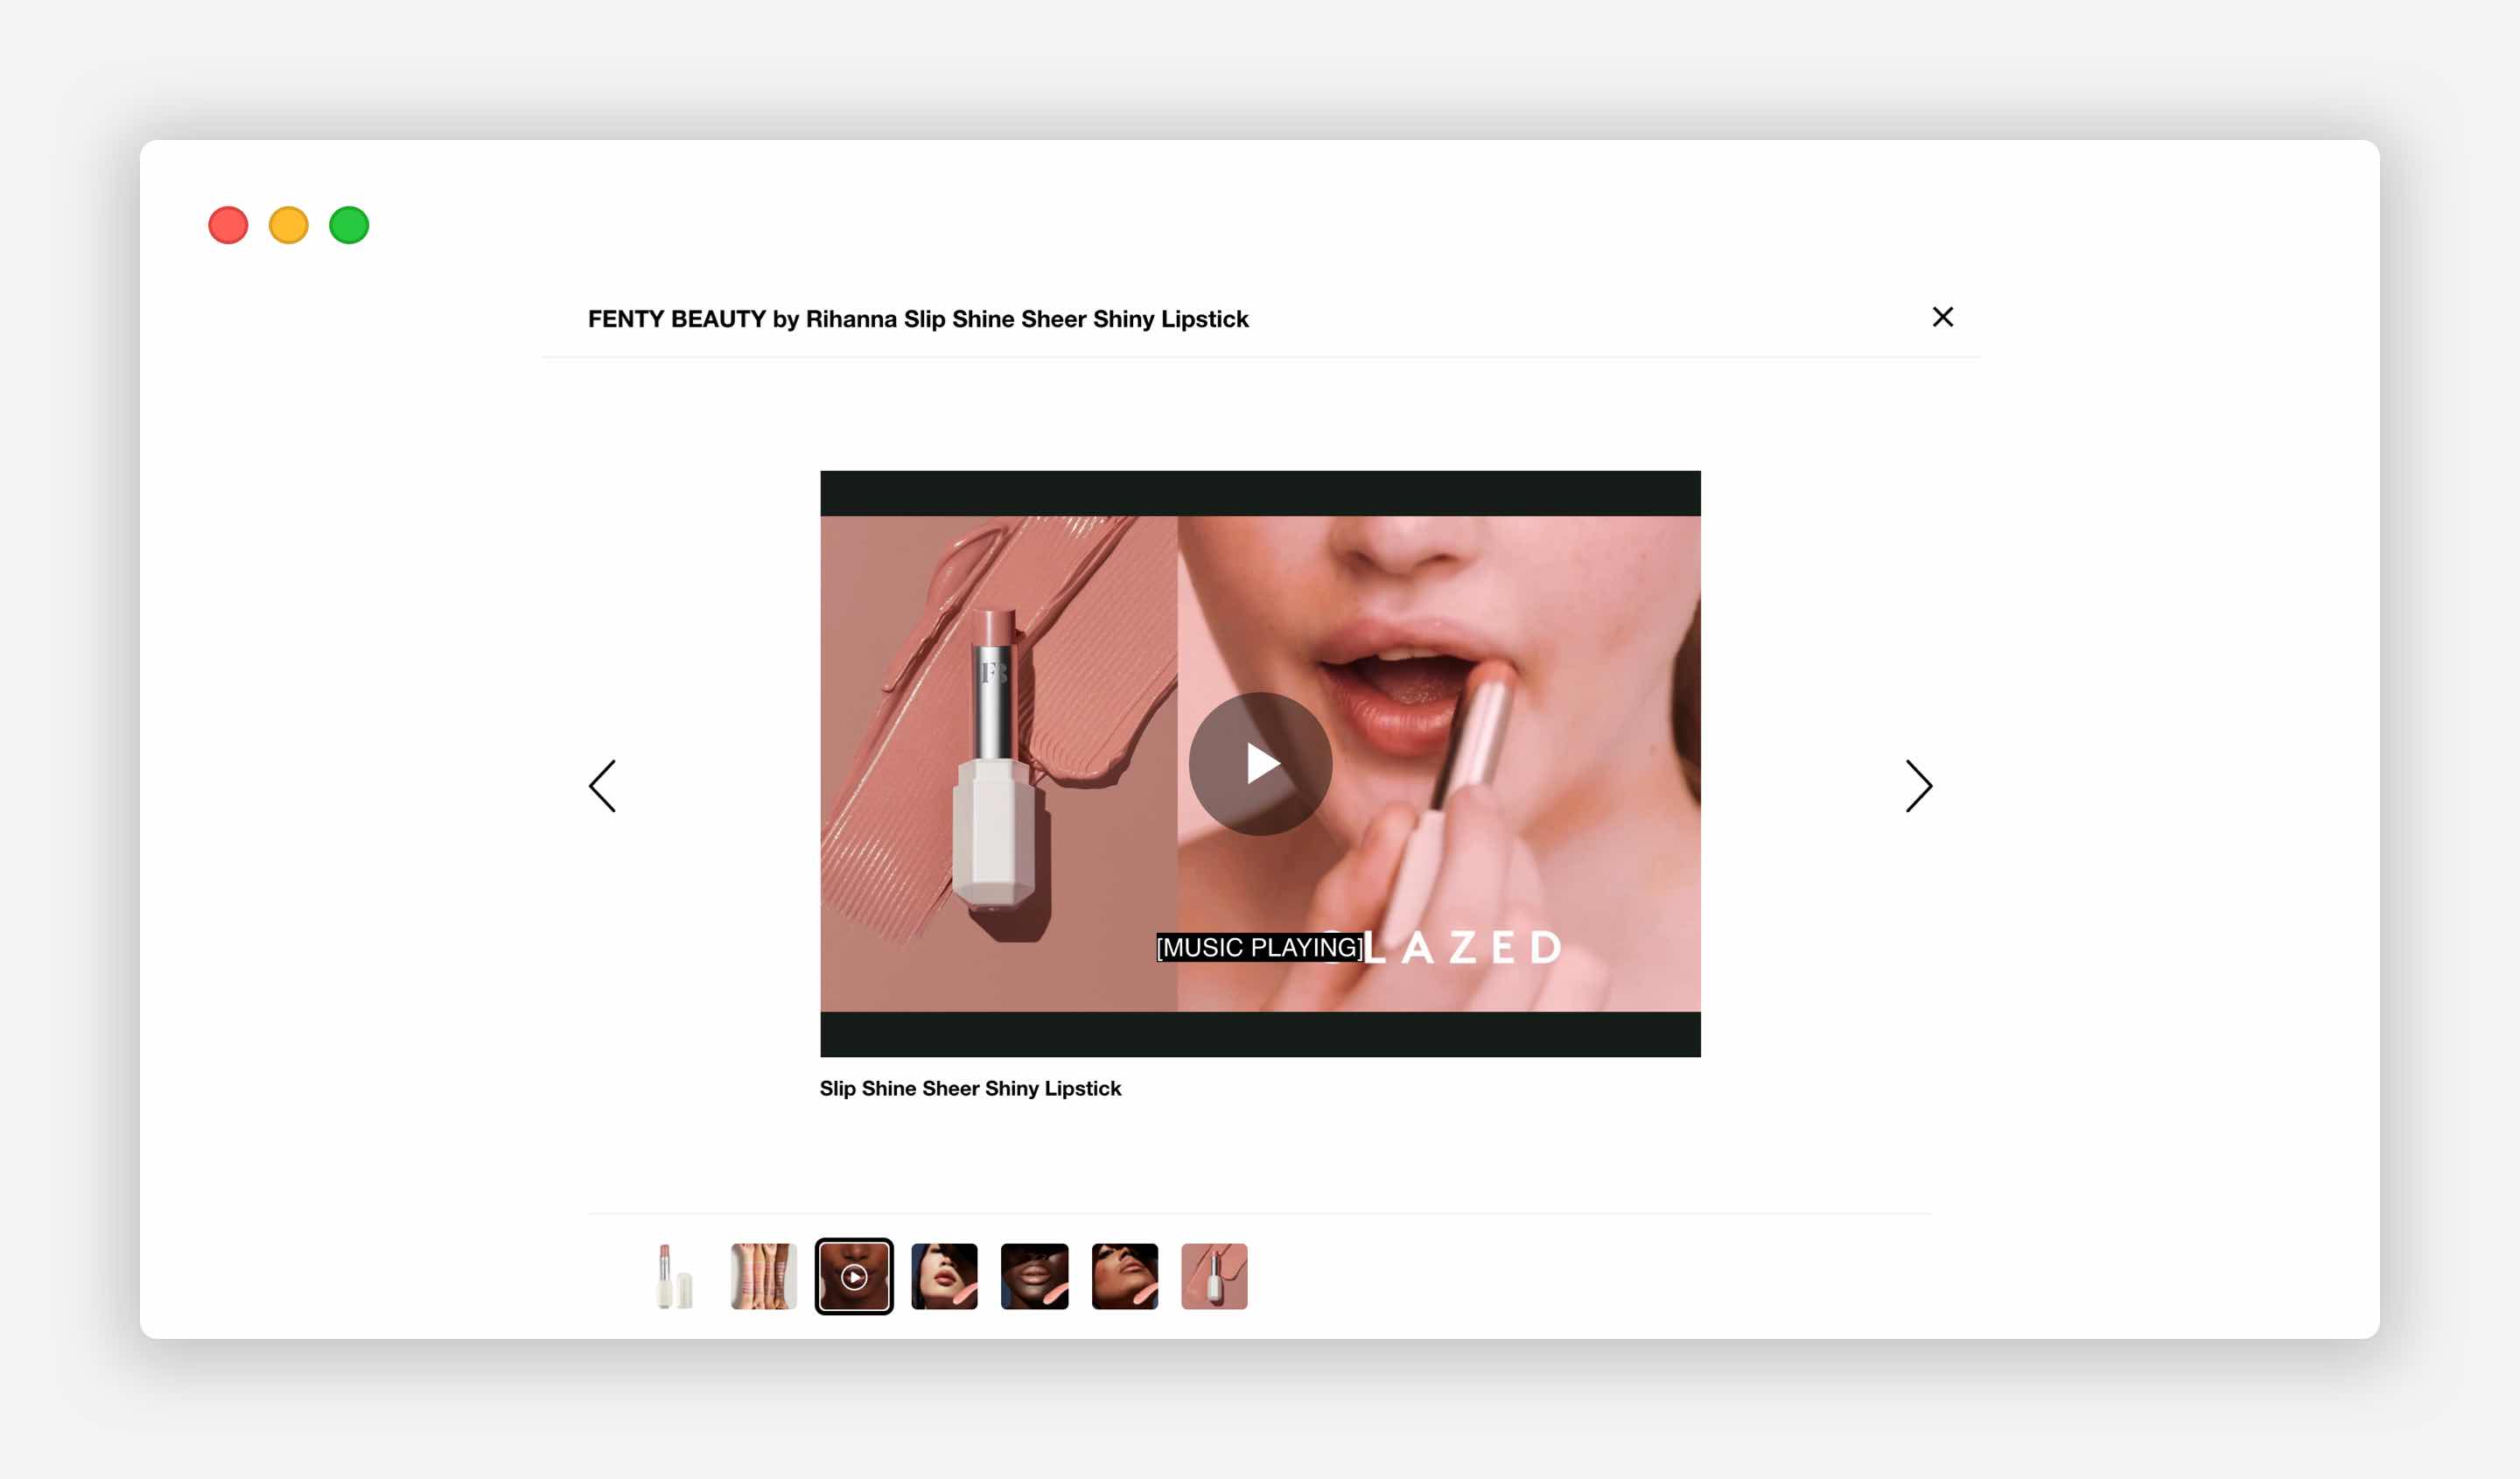 Additional product images and video on the product page. The Sephora example